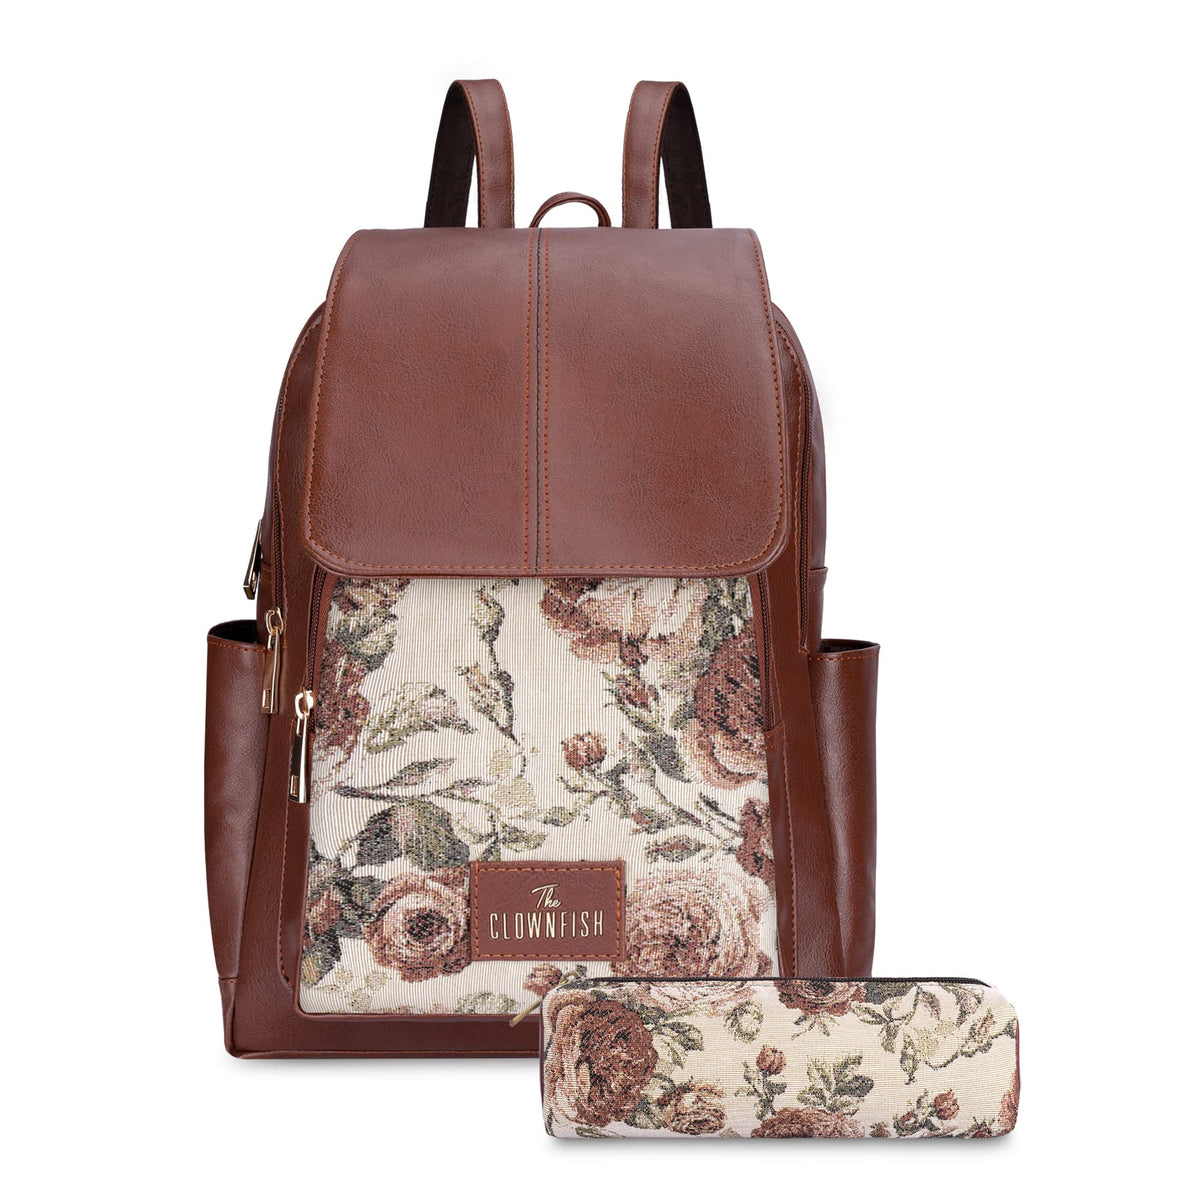 The Clownfish Medium Size Combo Of Minerva Faux Leather & Tapestry Women'S Backpack College School Girls Bag Casual Travel Backpack For Ladies & Expert Series Pencil Pouch Pen Case (Brown-Floral)